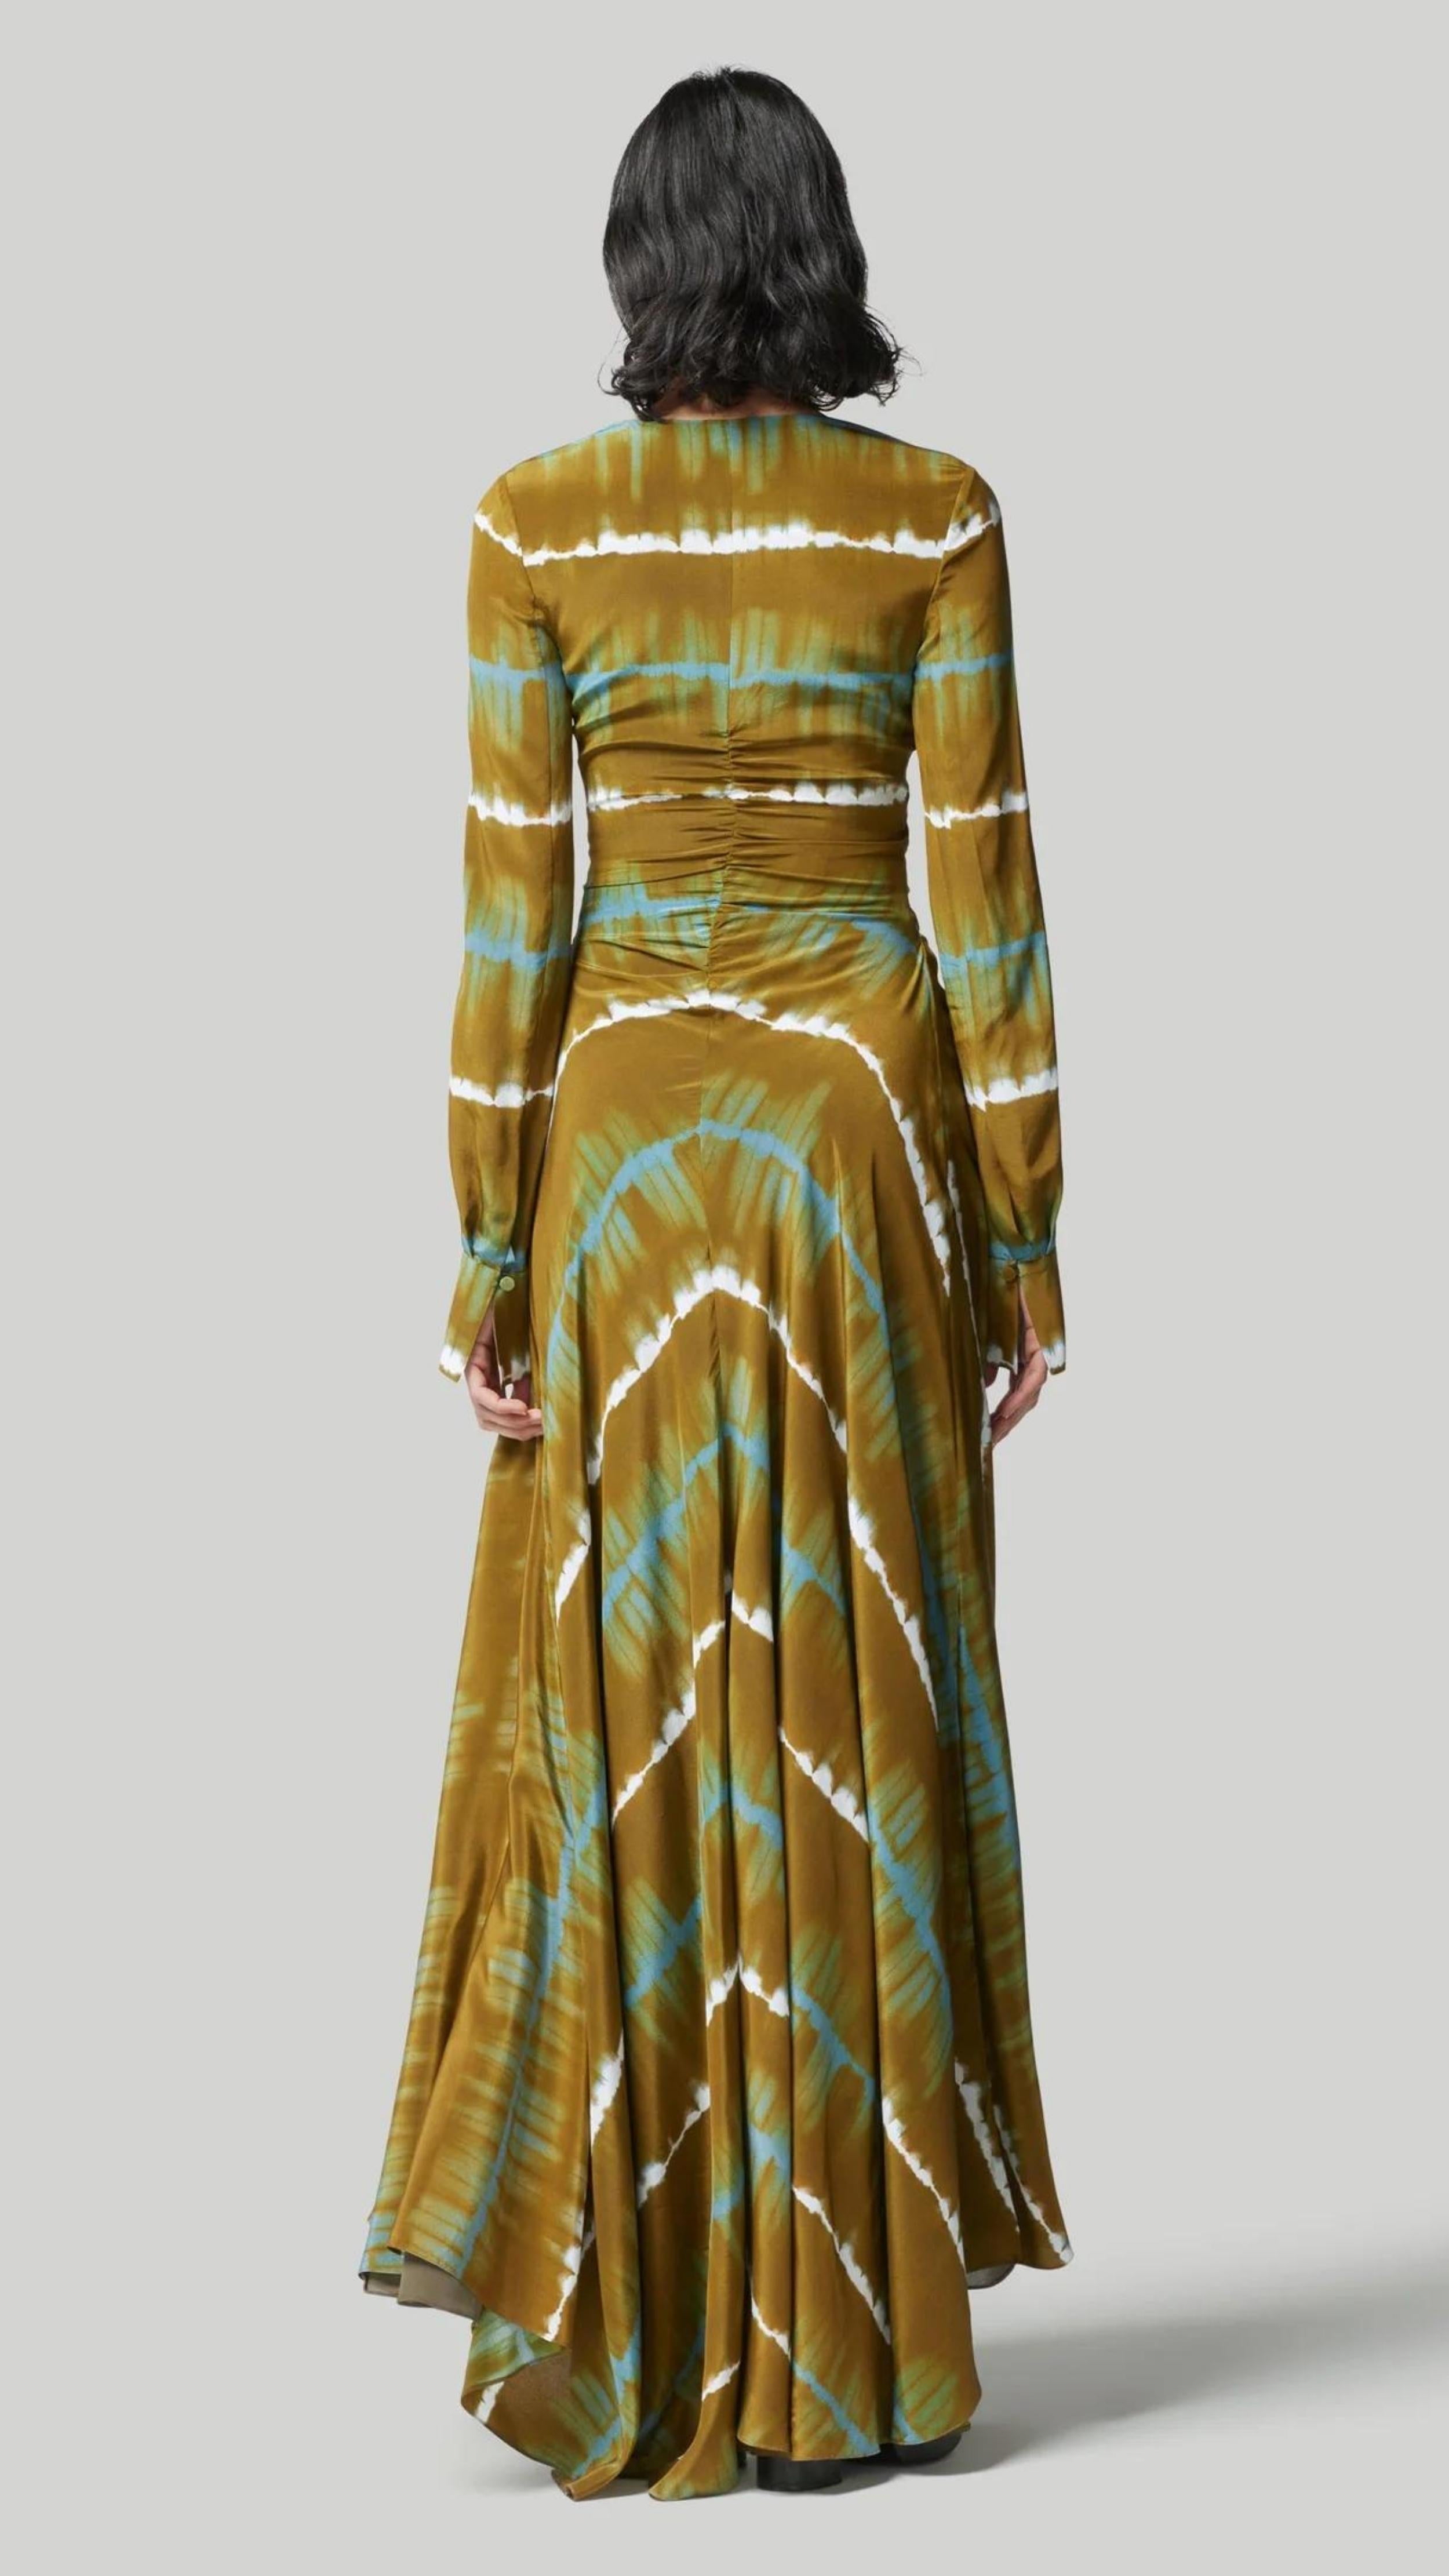 Altruzarra, Helenos Dress. 100% silk and shibori dyed in beautiful olive green and ecru pattern with a highlight pop of blue/green. It features a v neckline, long sleeves and a full skirt with front cut out and twist details. This pre-fall 2023 dress is shown on a model from the back view. Available at experience 27 in madrid, spain.